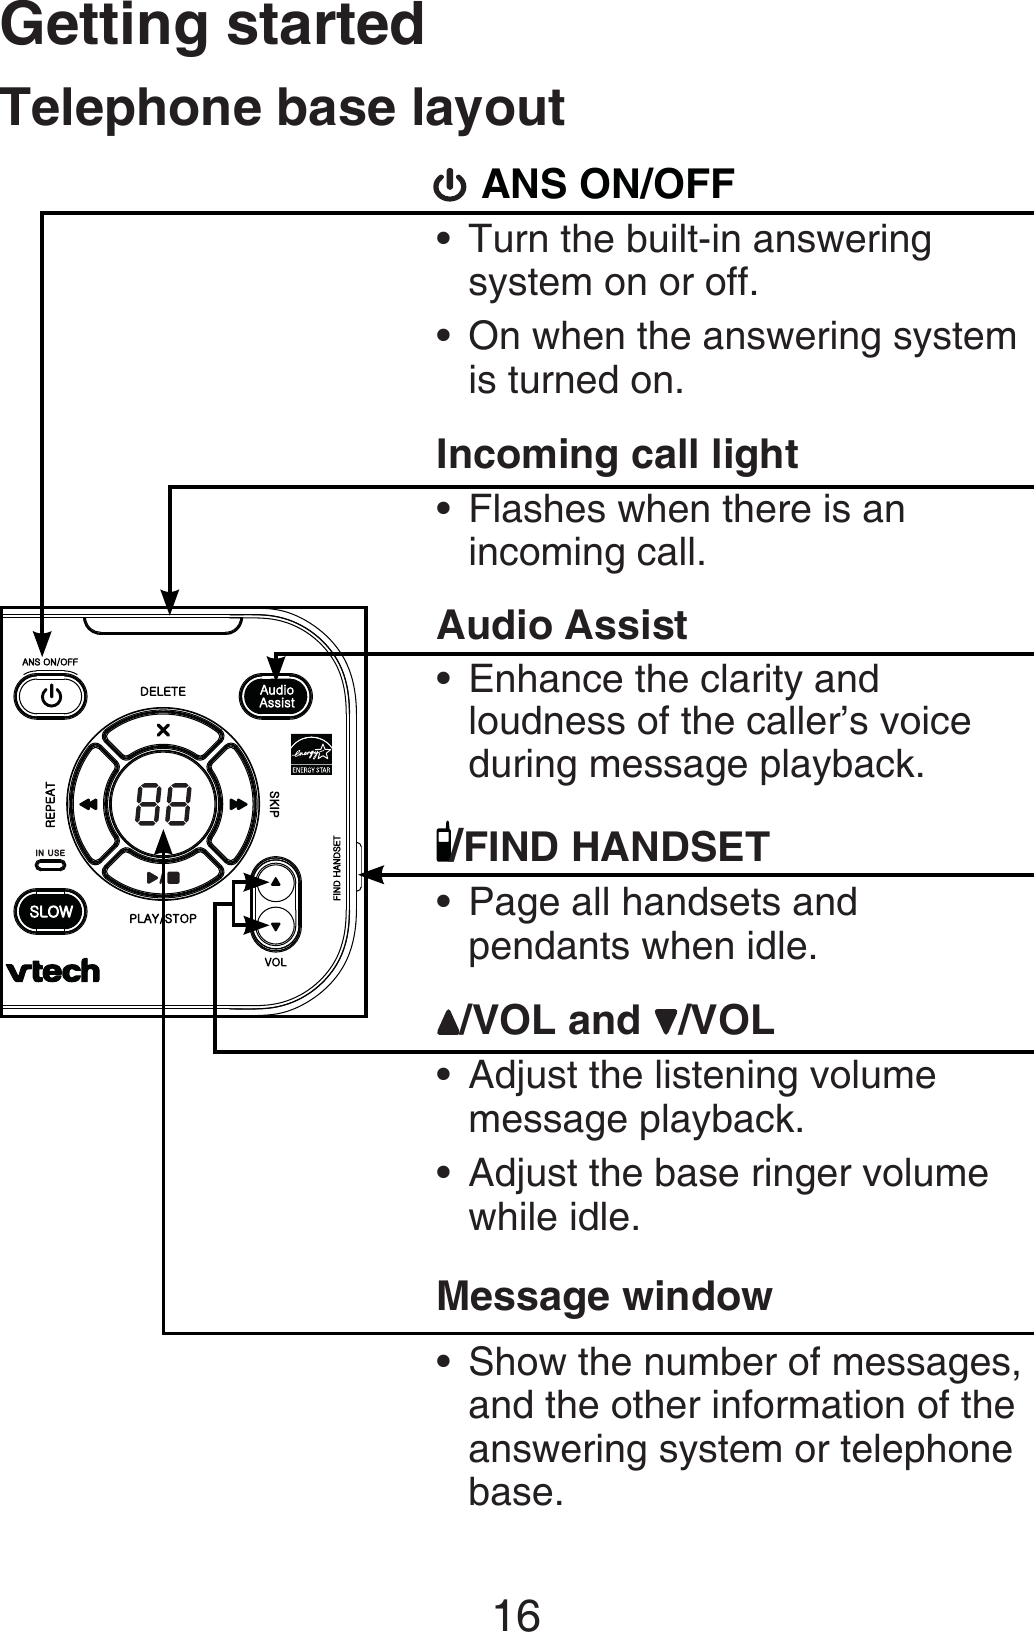 Getting started16Telephone base layout ANS ON/OFFTurn the built-in answering system on or off.On when the answering system is turned on.Incoming call lightFlashes when there is an incoming call.Audio AssistEnhance the clarity and loudness of the caller’s voice during message playback./FIND HANDSETPage all handsets and pendants when idle./VOL and /VOLAdjust the listening volume message playback.Adjust the base ringer volume while idle.Message windowShow the number of messages, and the other information of the answering system or telephone base.••••••••